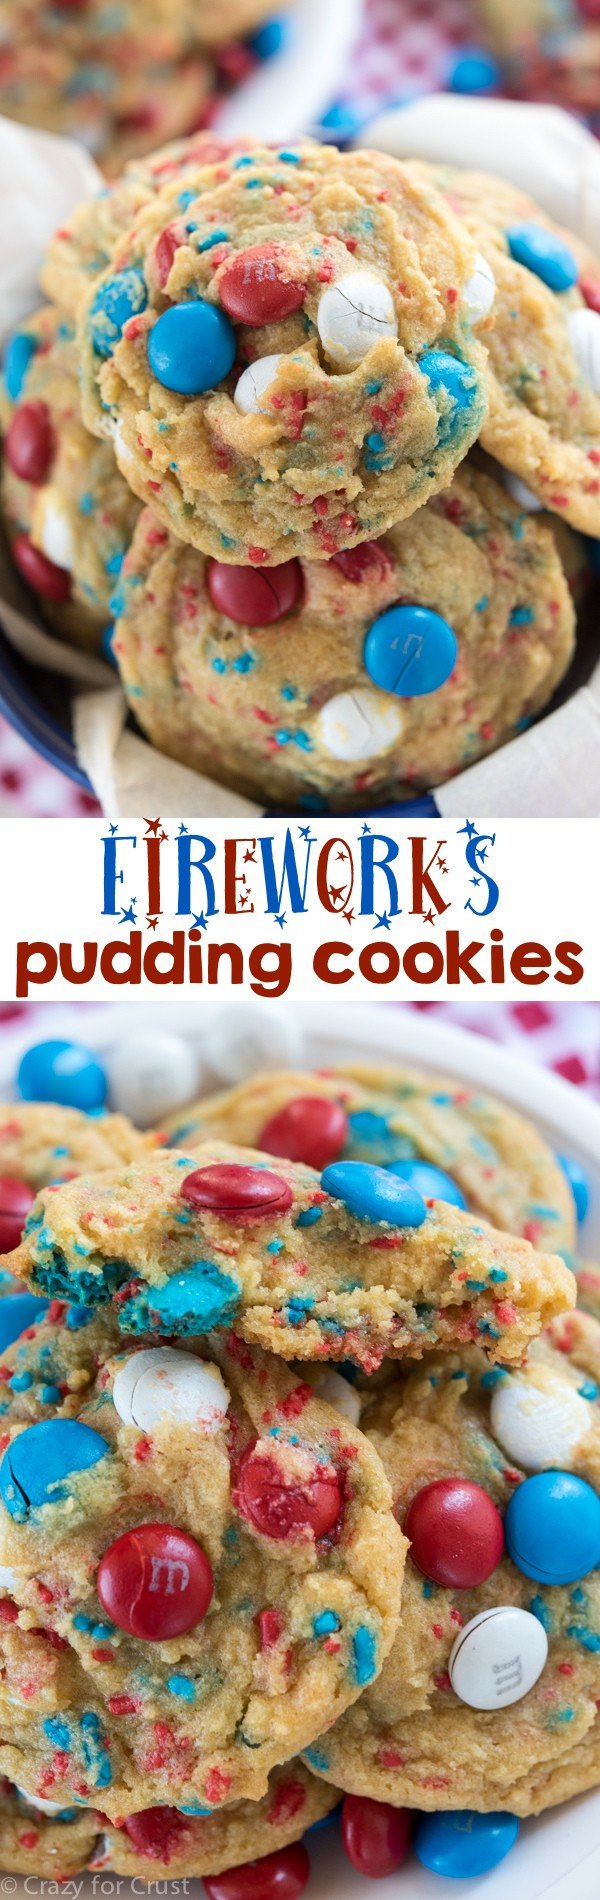 Fireworks pudding cookies collage shot with words in the middle